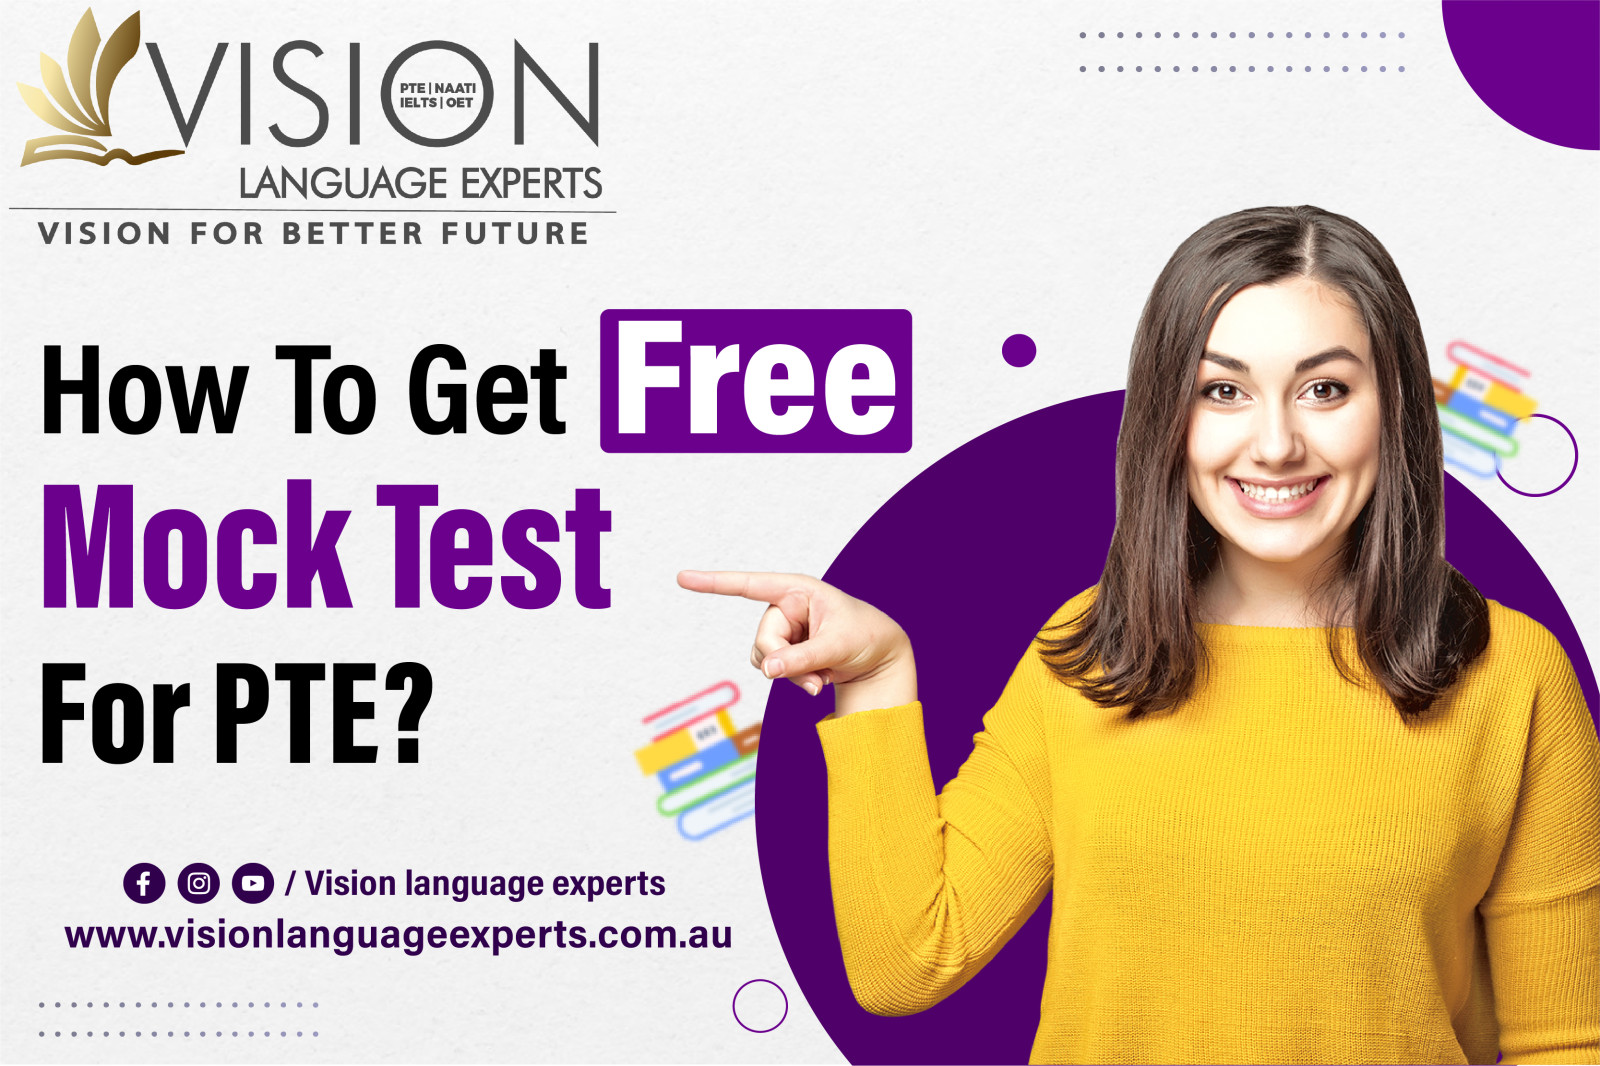 How to Get Free Mock Test for PTE?